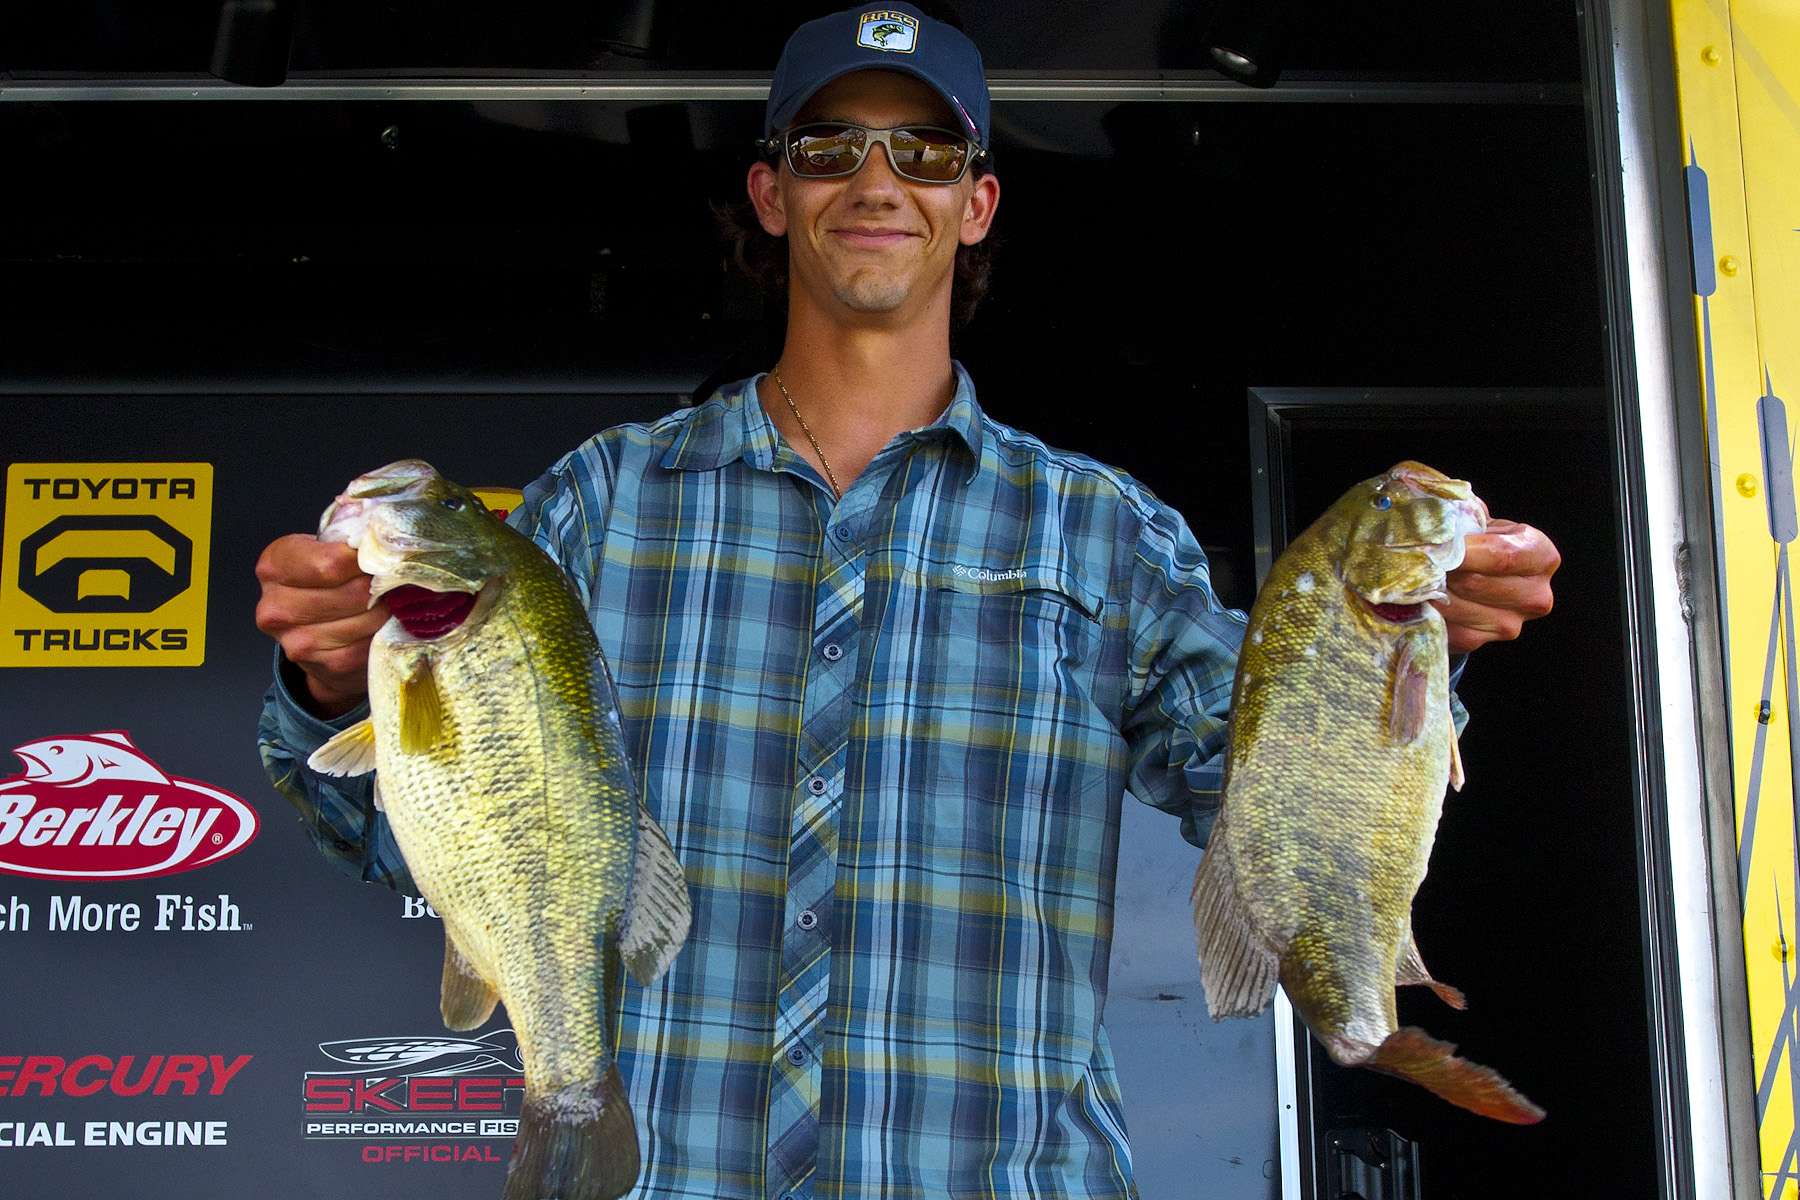 The anglers coo over the beauty of the lake, as well as the fishing. Here Stephen Longobardi shows nice representatives of the lakeâs largemouth and smallmouth populations he caught during the 2012 Northern Open.